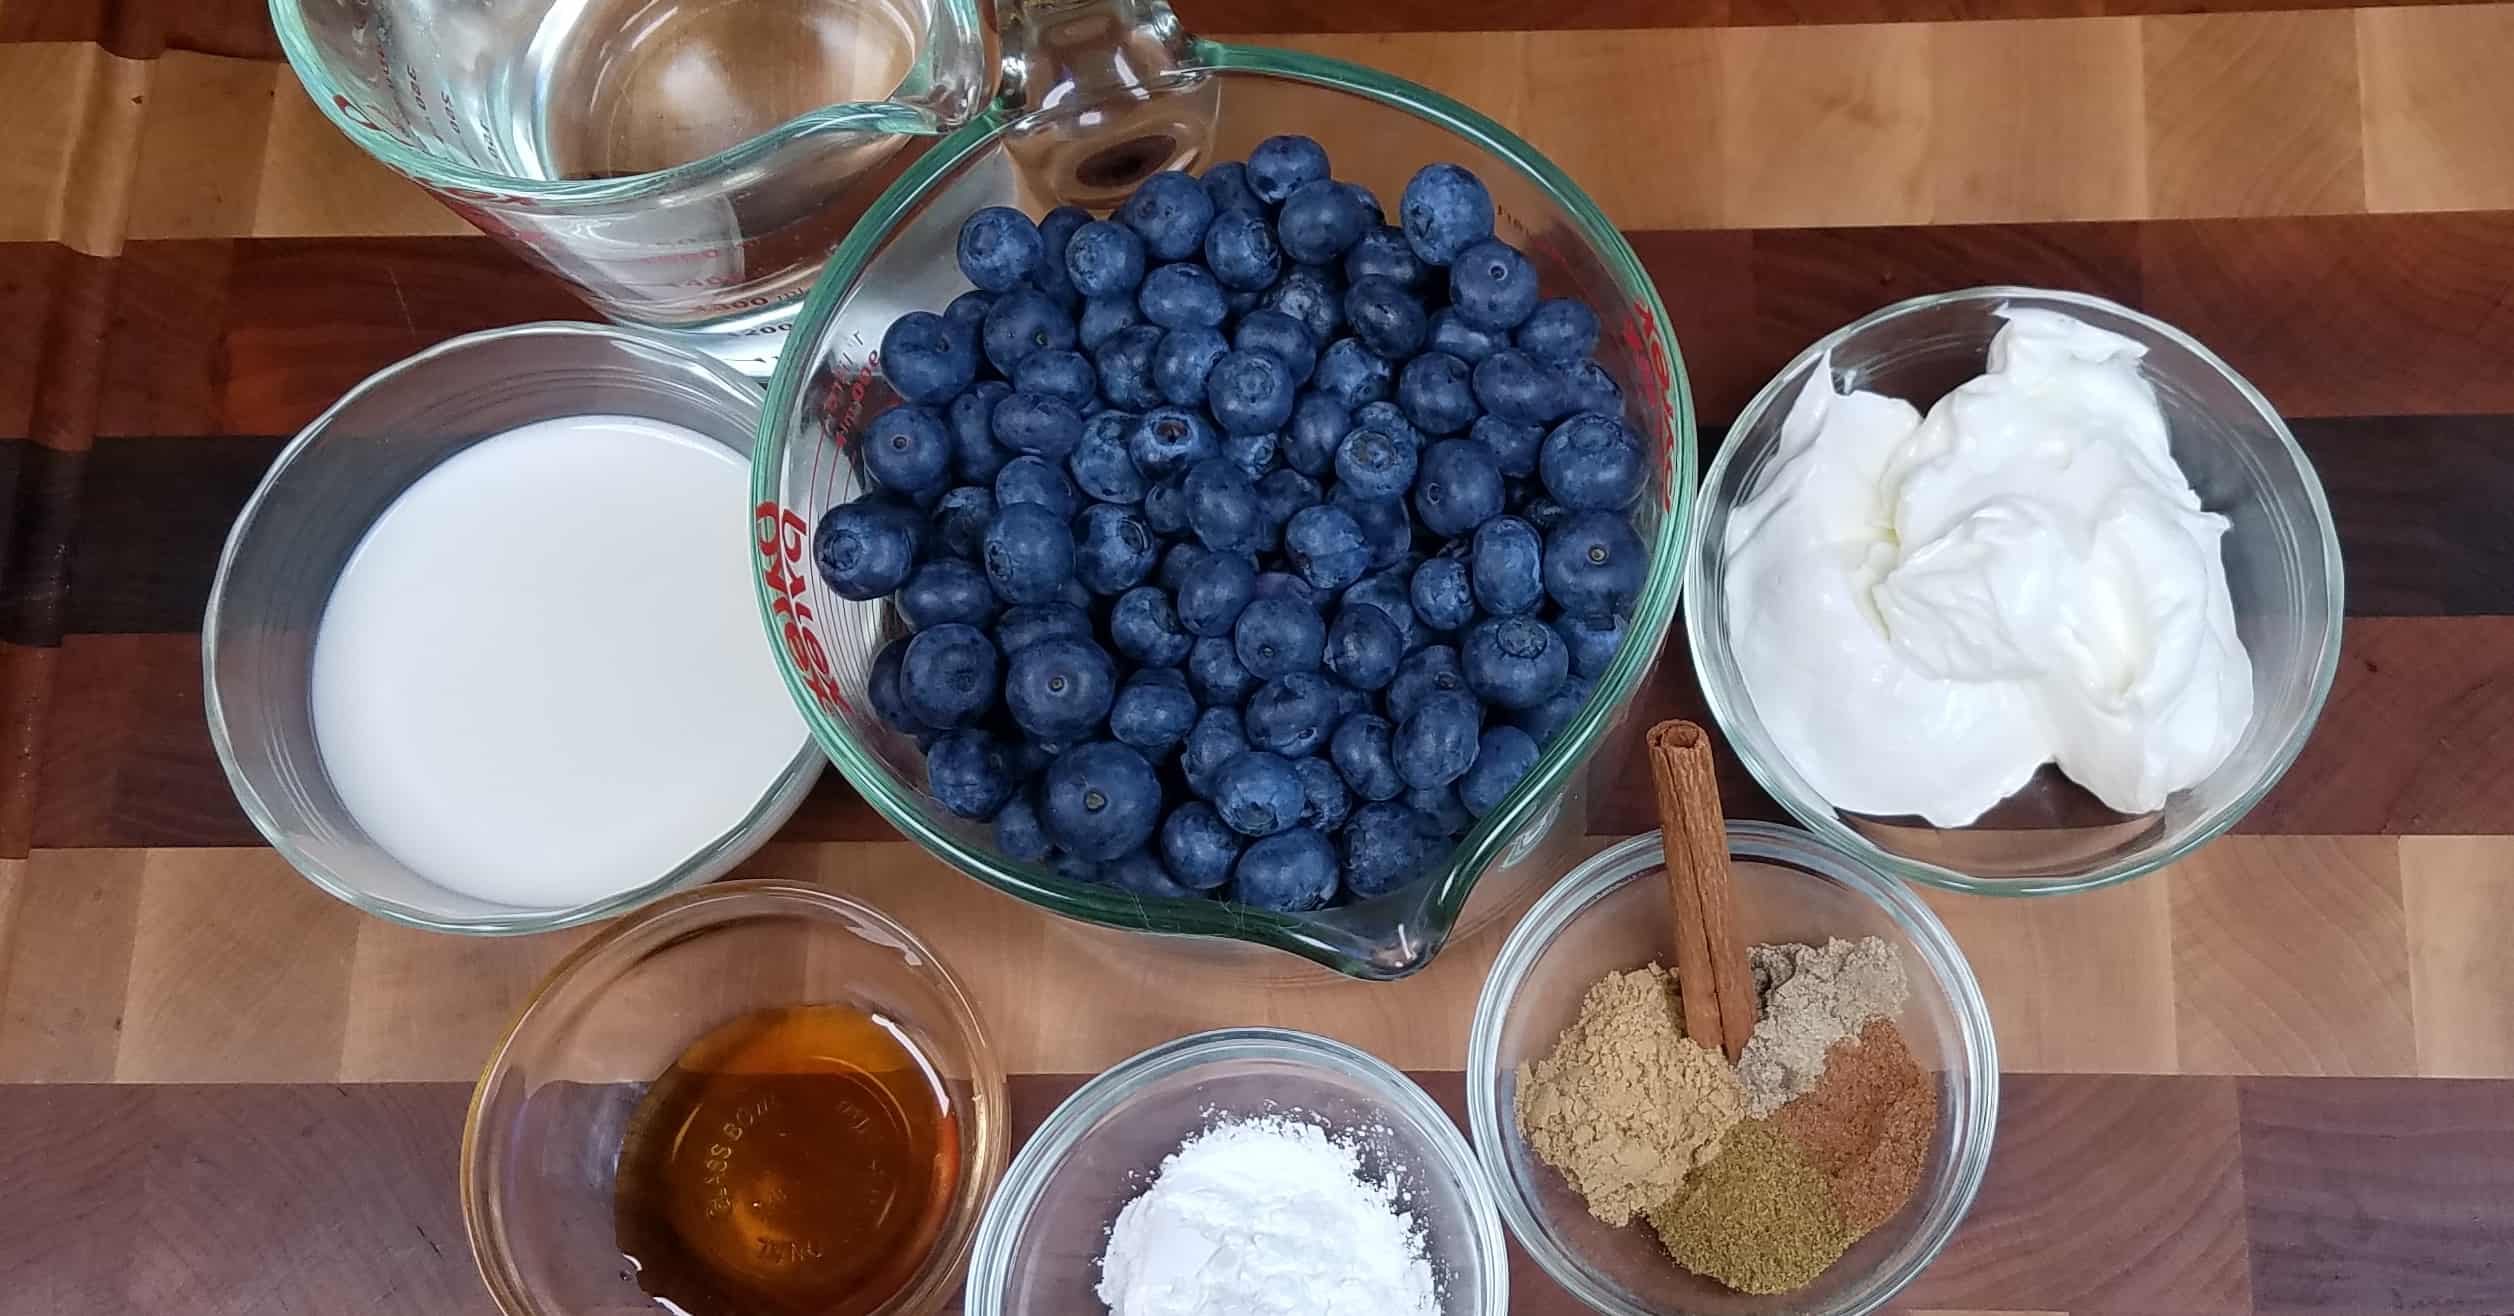 Spiced Blueberry Soup ingredients